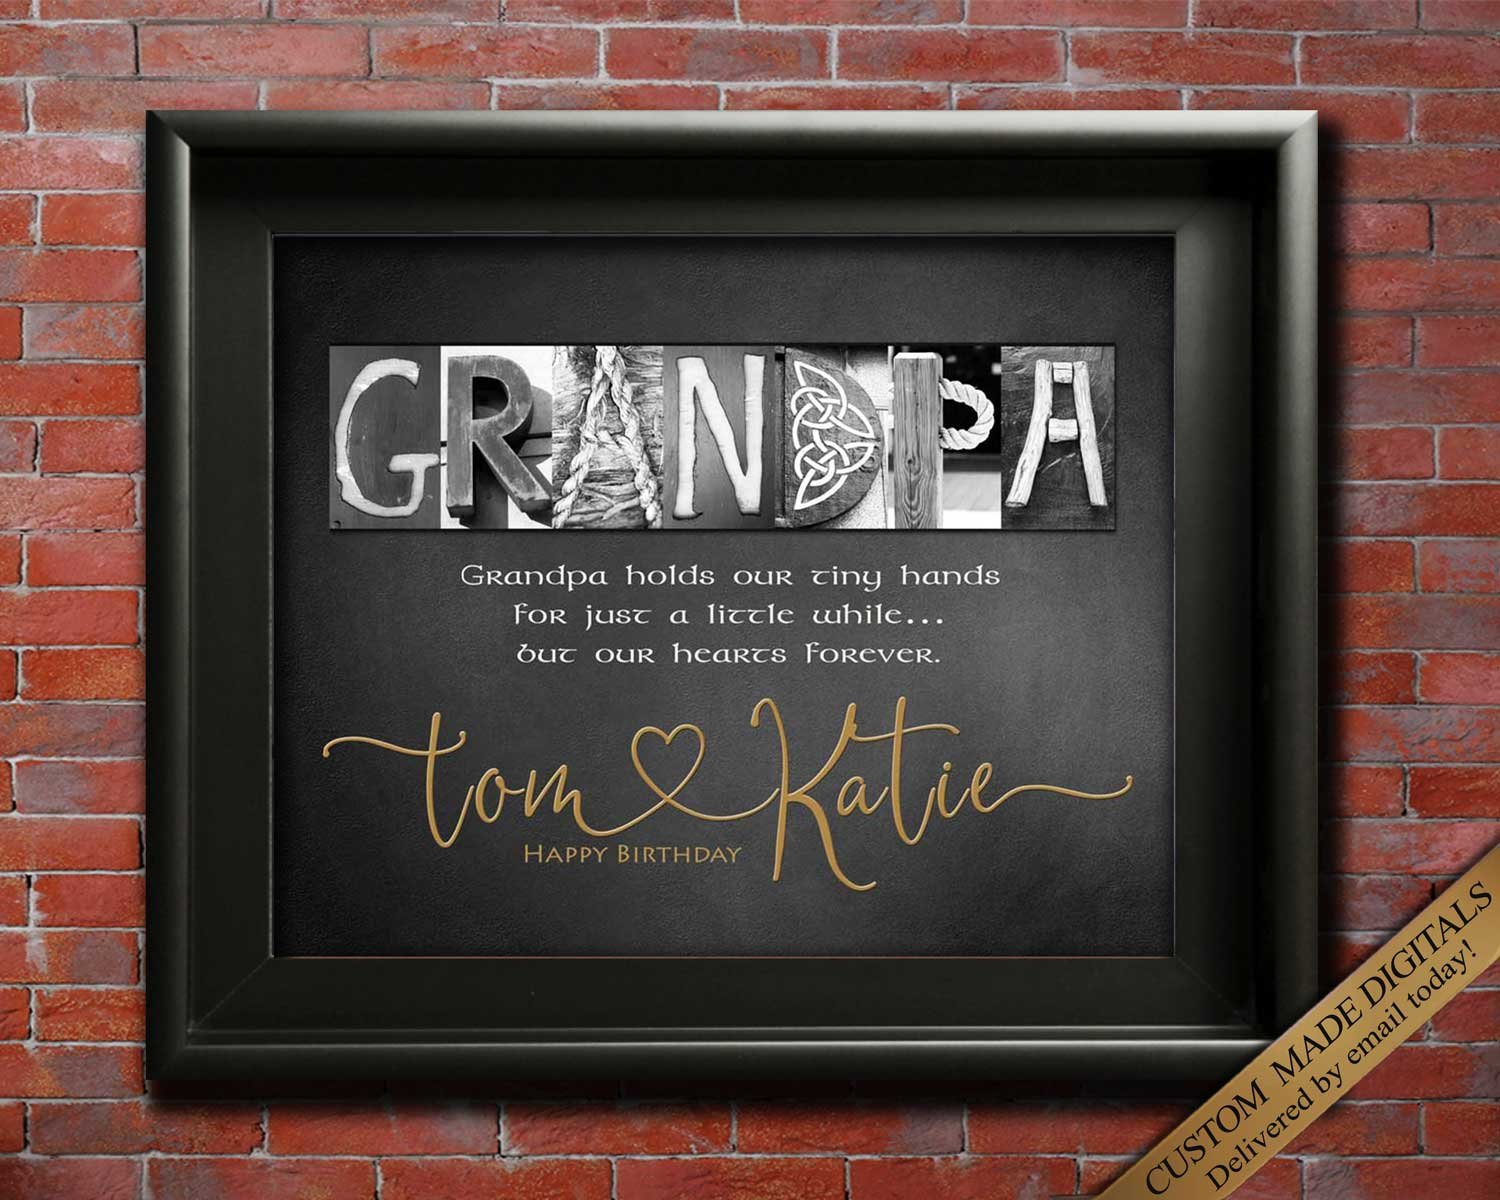 GIFTAGIRL Gifts for Grandparents Who Have Everything - Great Grandparents  Gifts from Grandkids or Grandma and Grandpa Gifts. A Cheeky but Fun